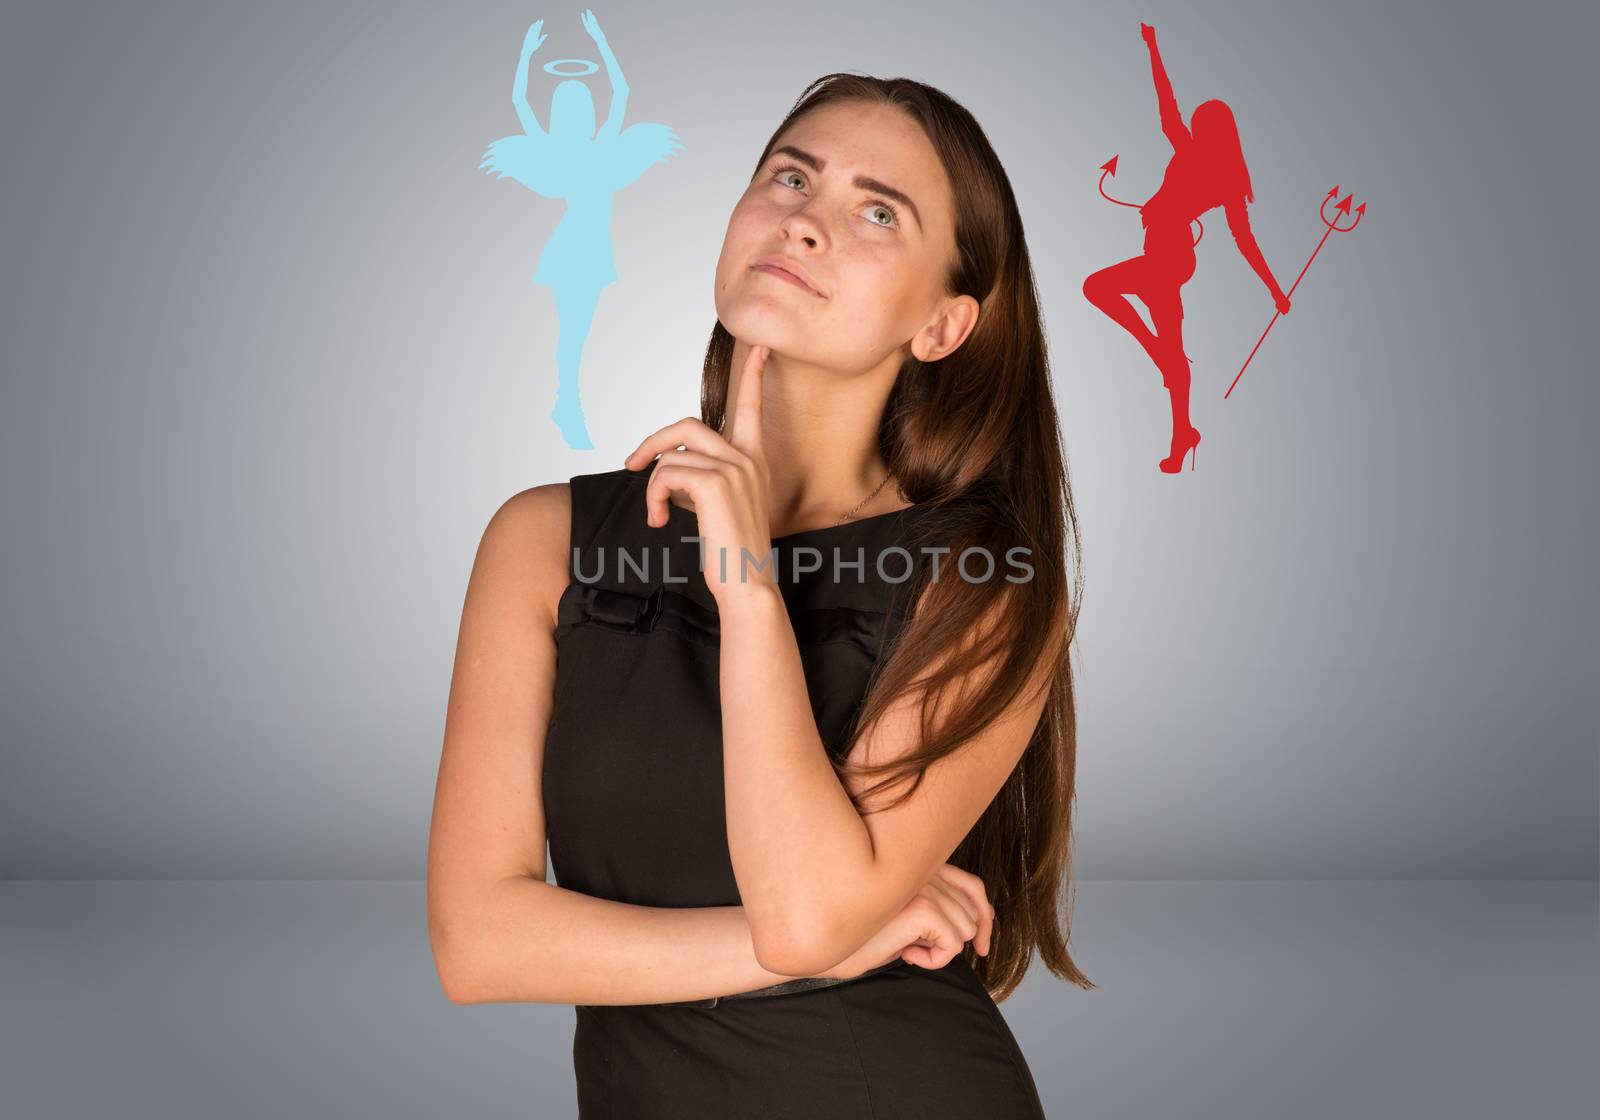 Woman musing between angelic and devilish figures. On gray background